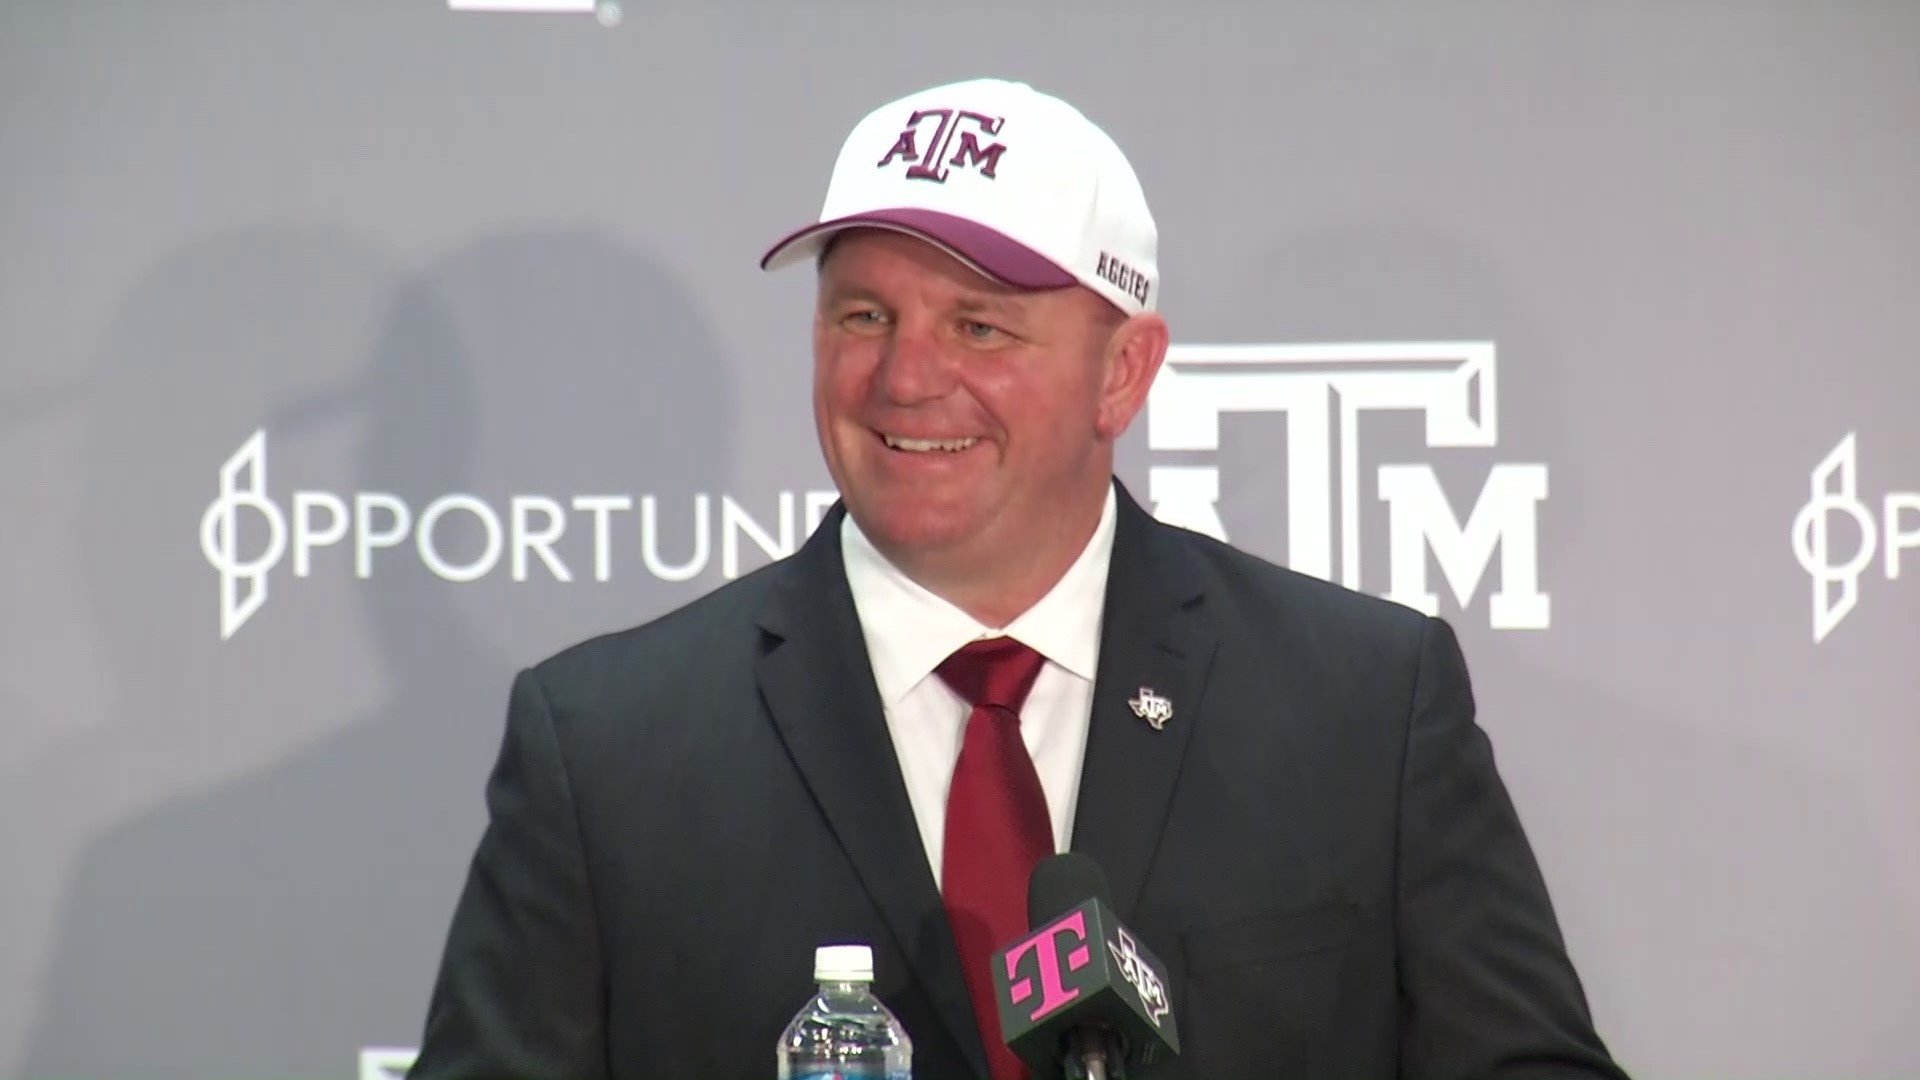 Texas A&M athletic director Ross Bjork hosted an introductory press conference with new head football coach Mike Elko in College Station on Monday, November 27.